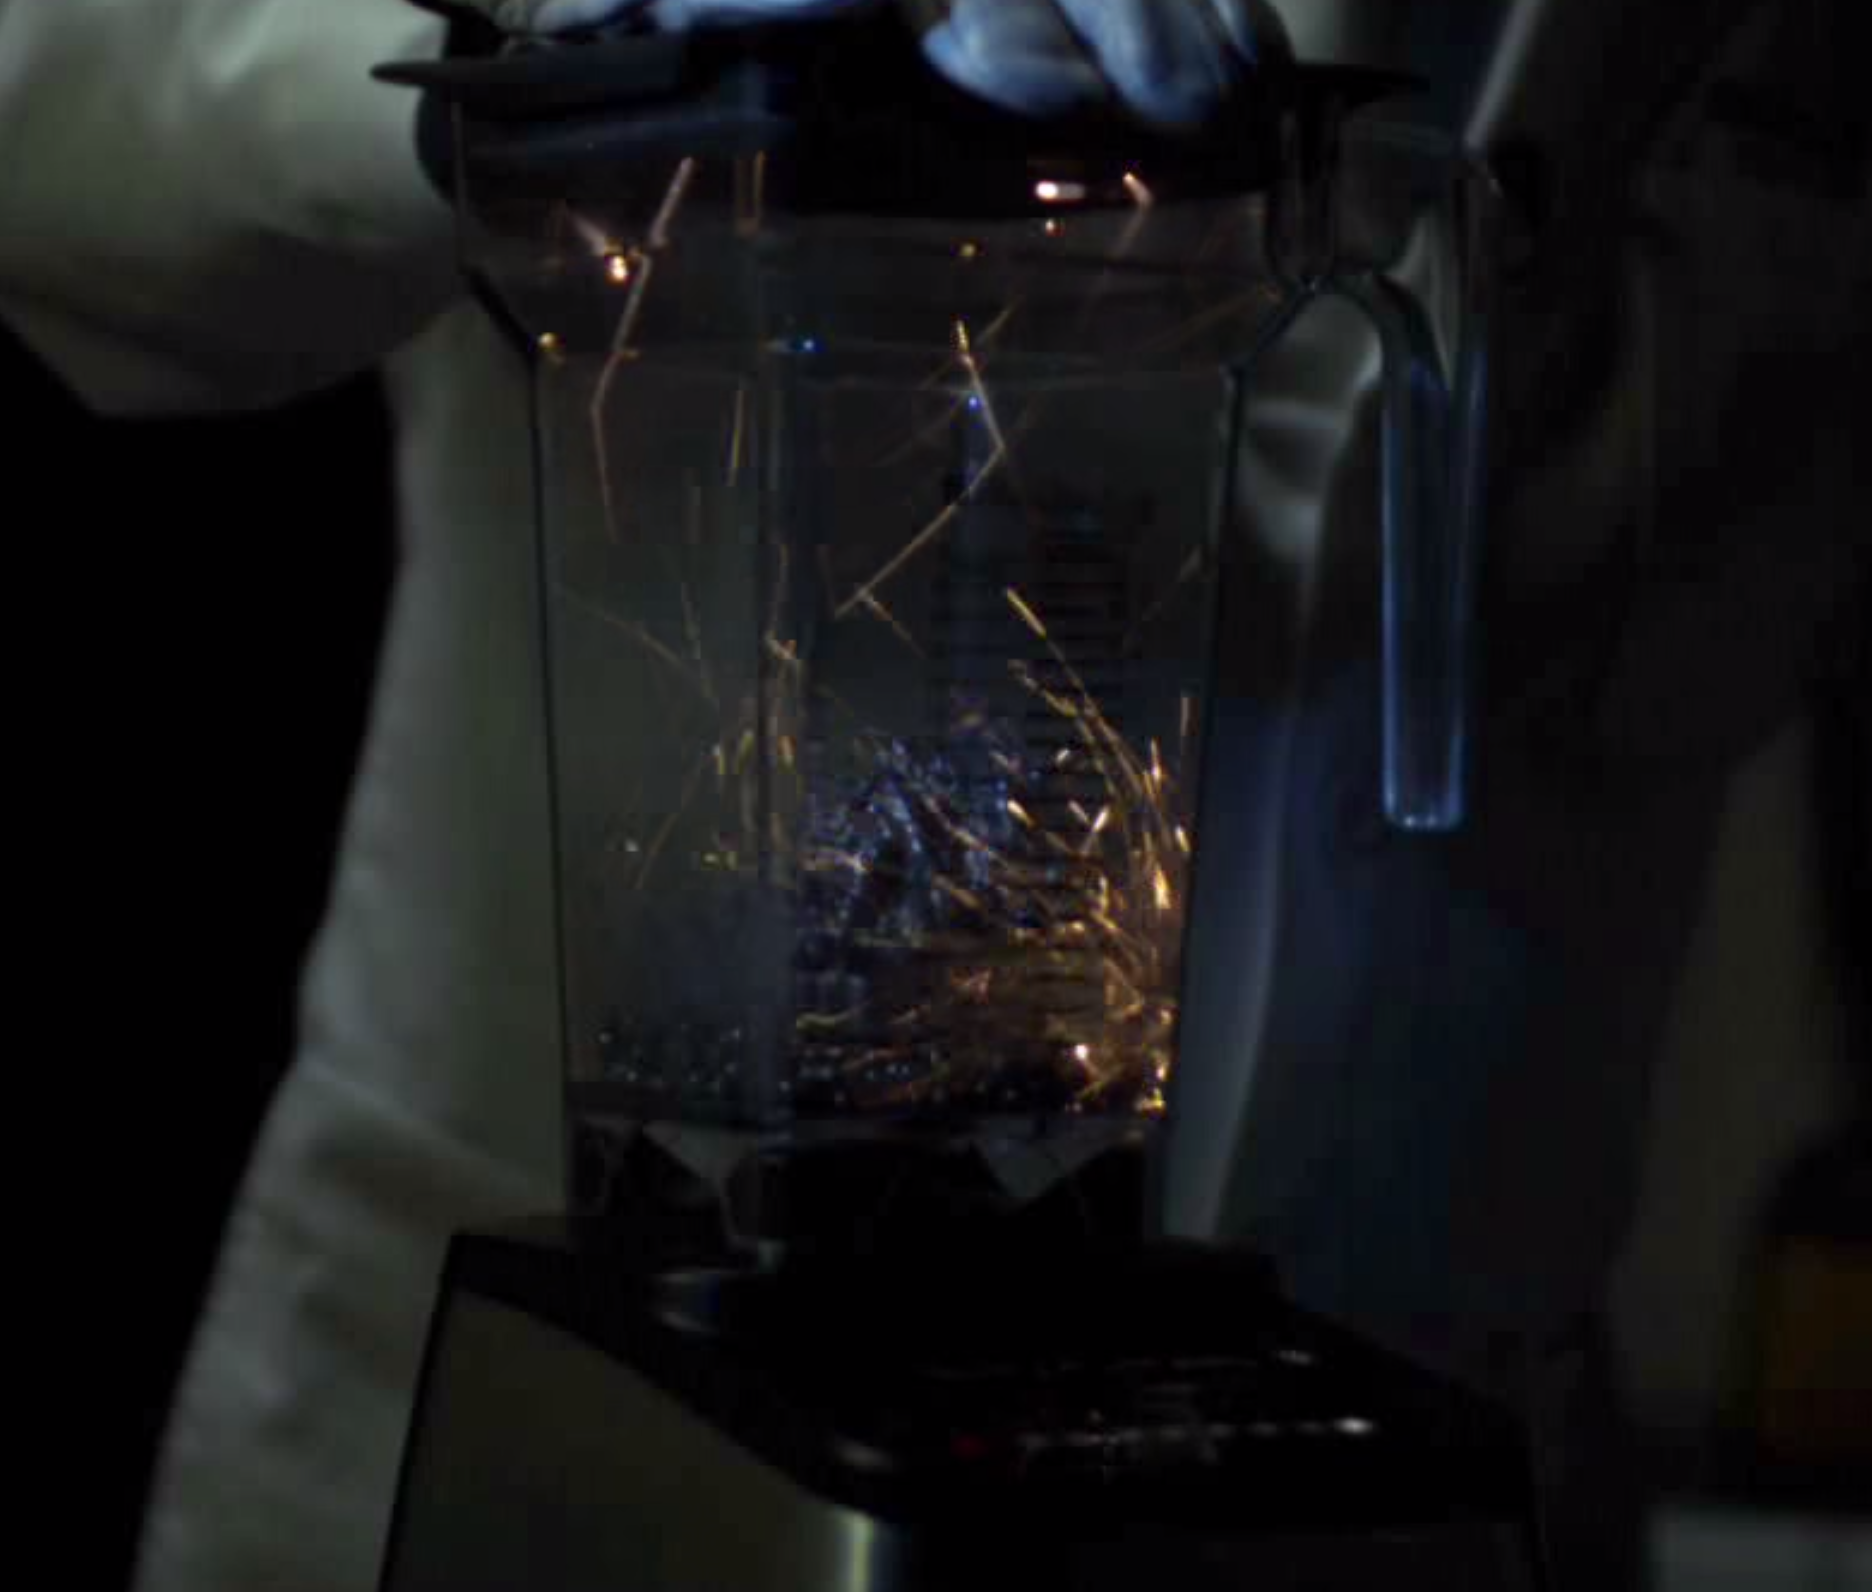 This Is What Happens When You Put Magnetic Buckyballs In A Blender [Video]